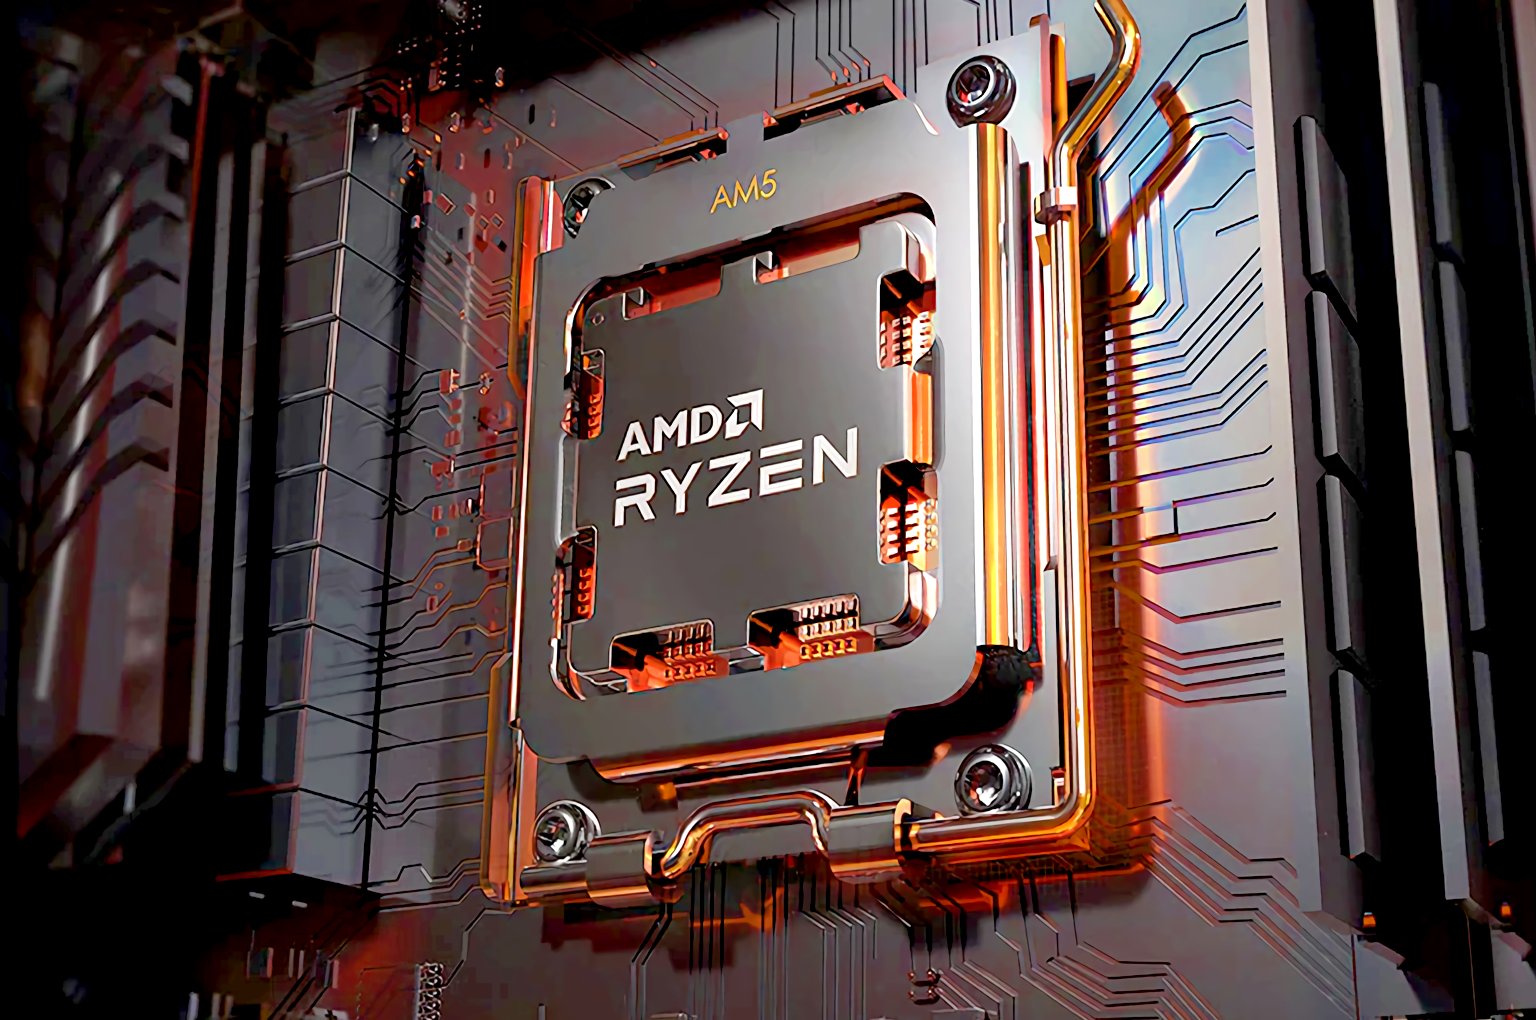 AMD AM5 platform: B650, X670, X670E chipsets and how they differ 